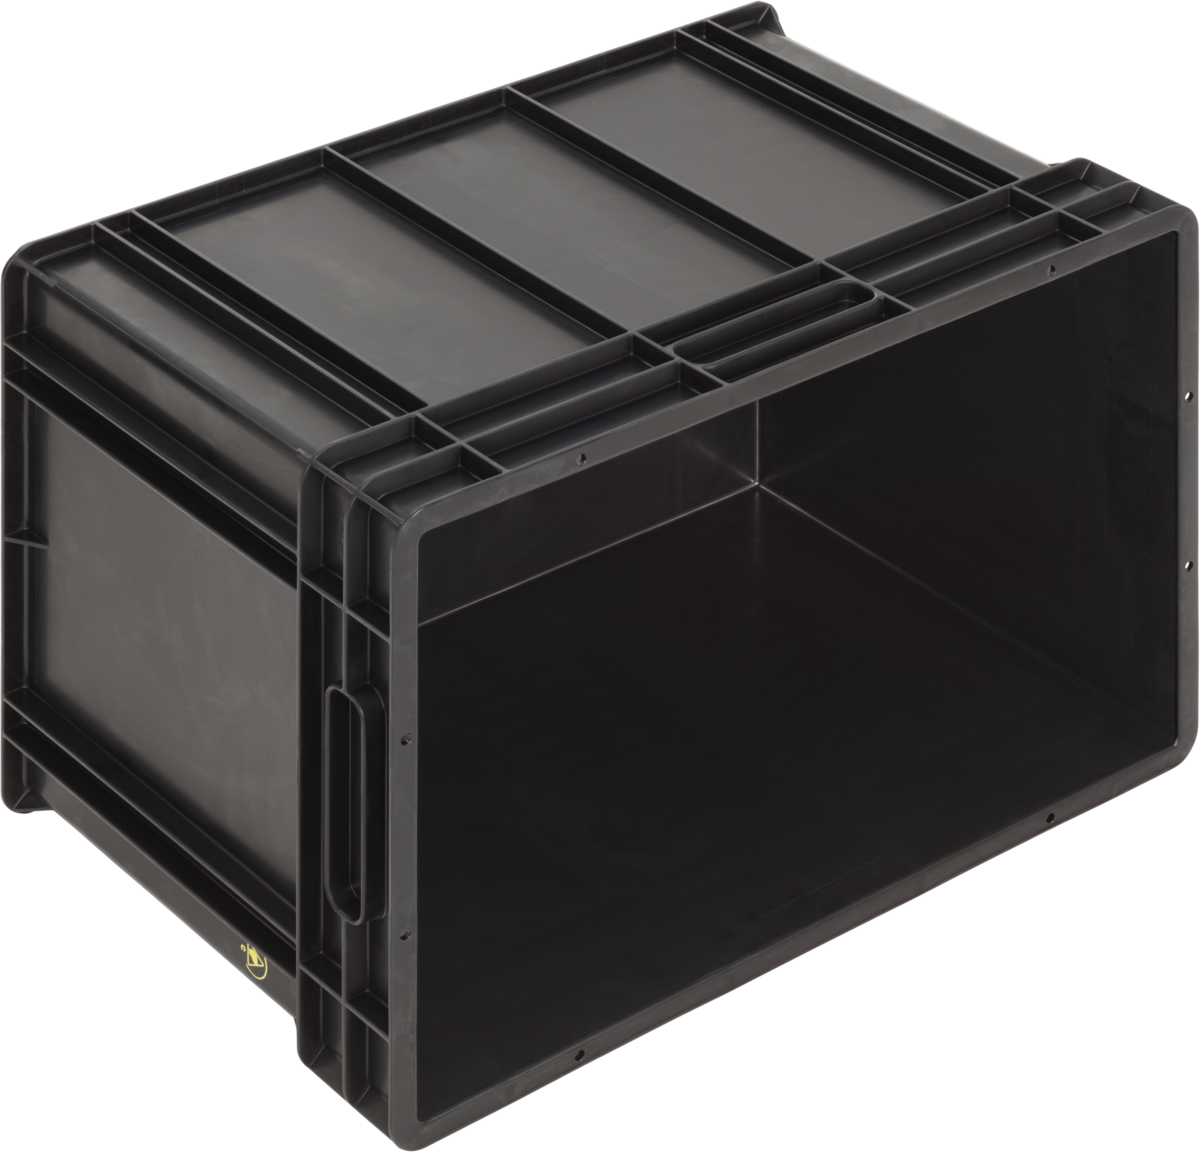 ESD-Safe-SGL-Norm-Stacking-Bin-Containers-SGL-Base-Ref.-6440.000.992_1004528_600x400x412_03